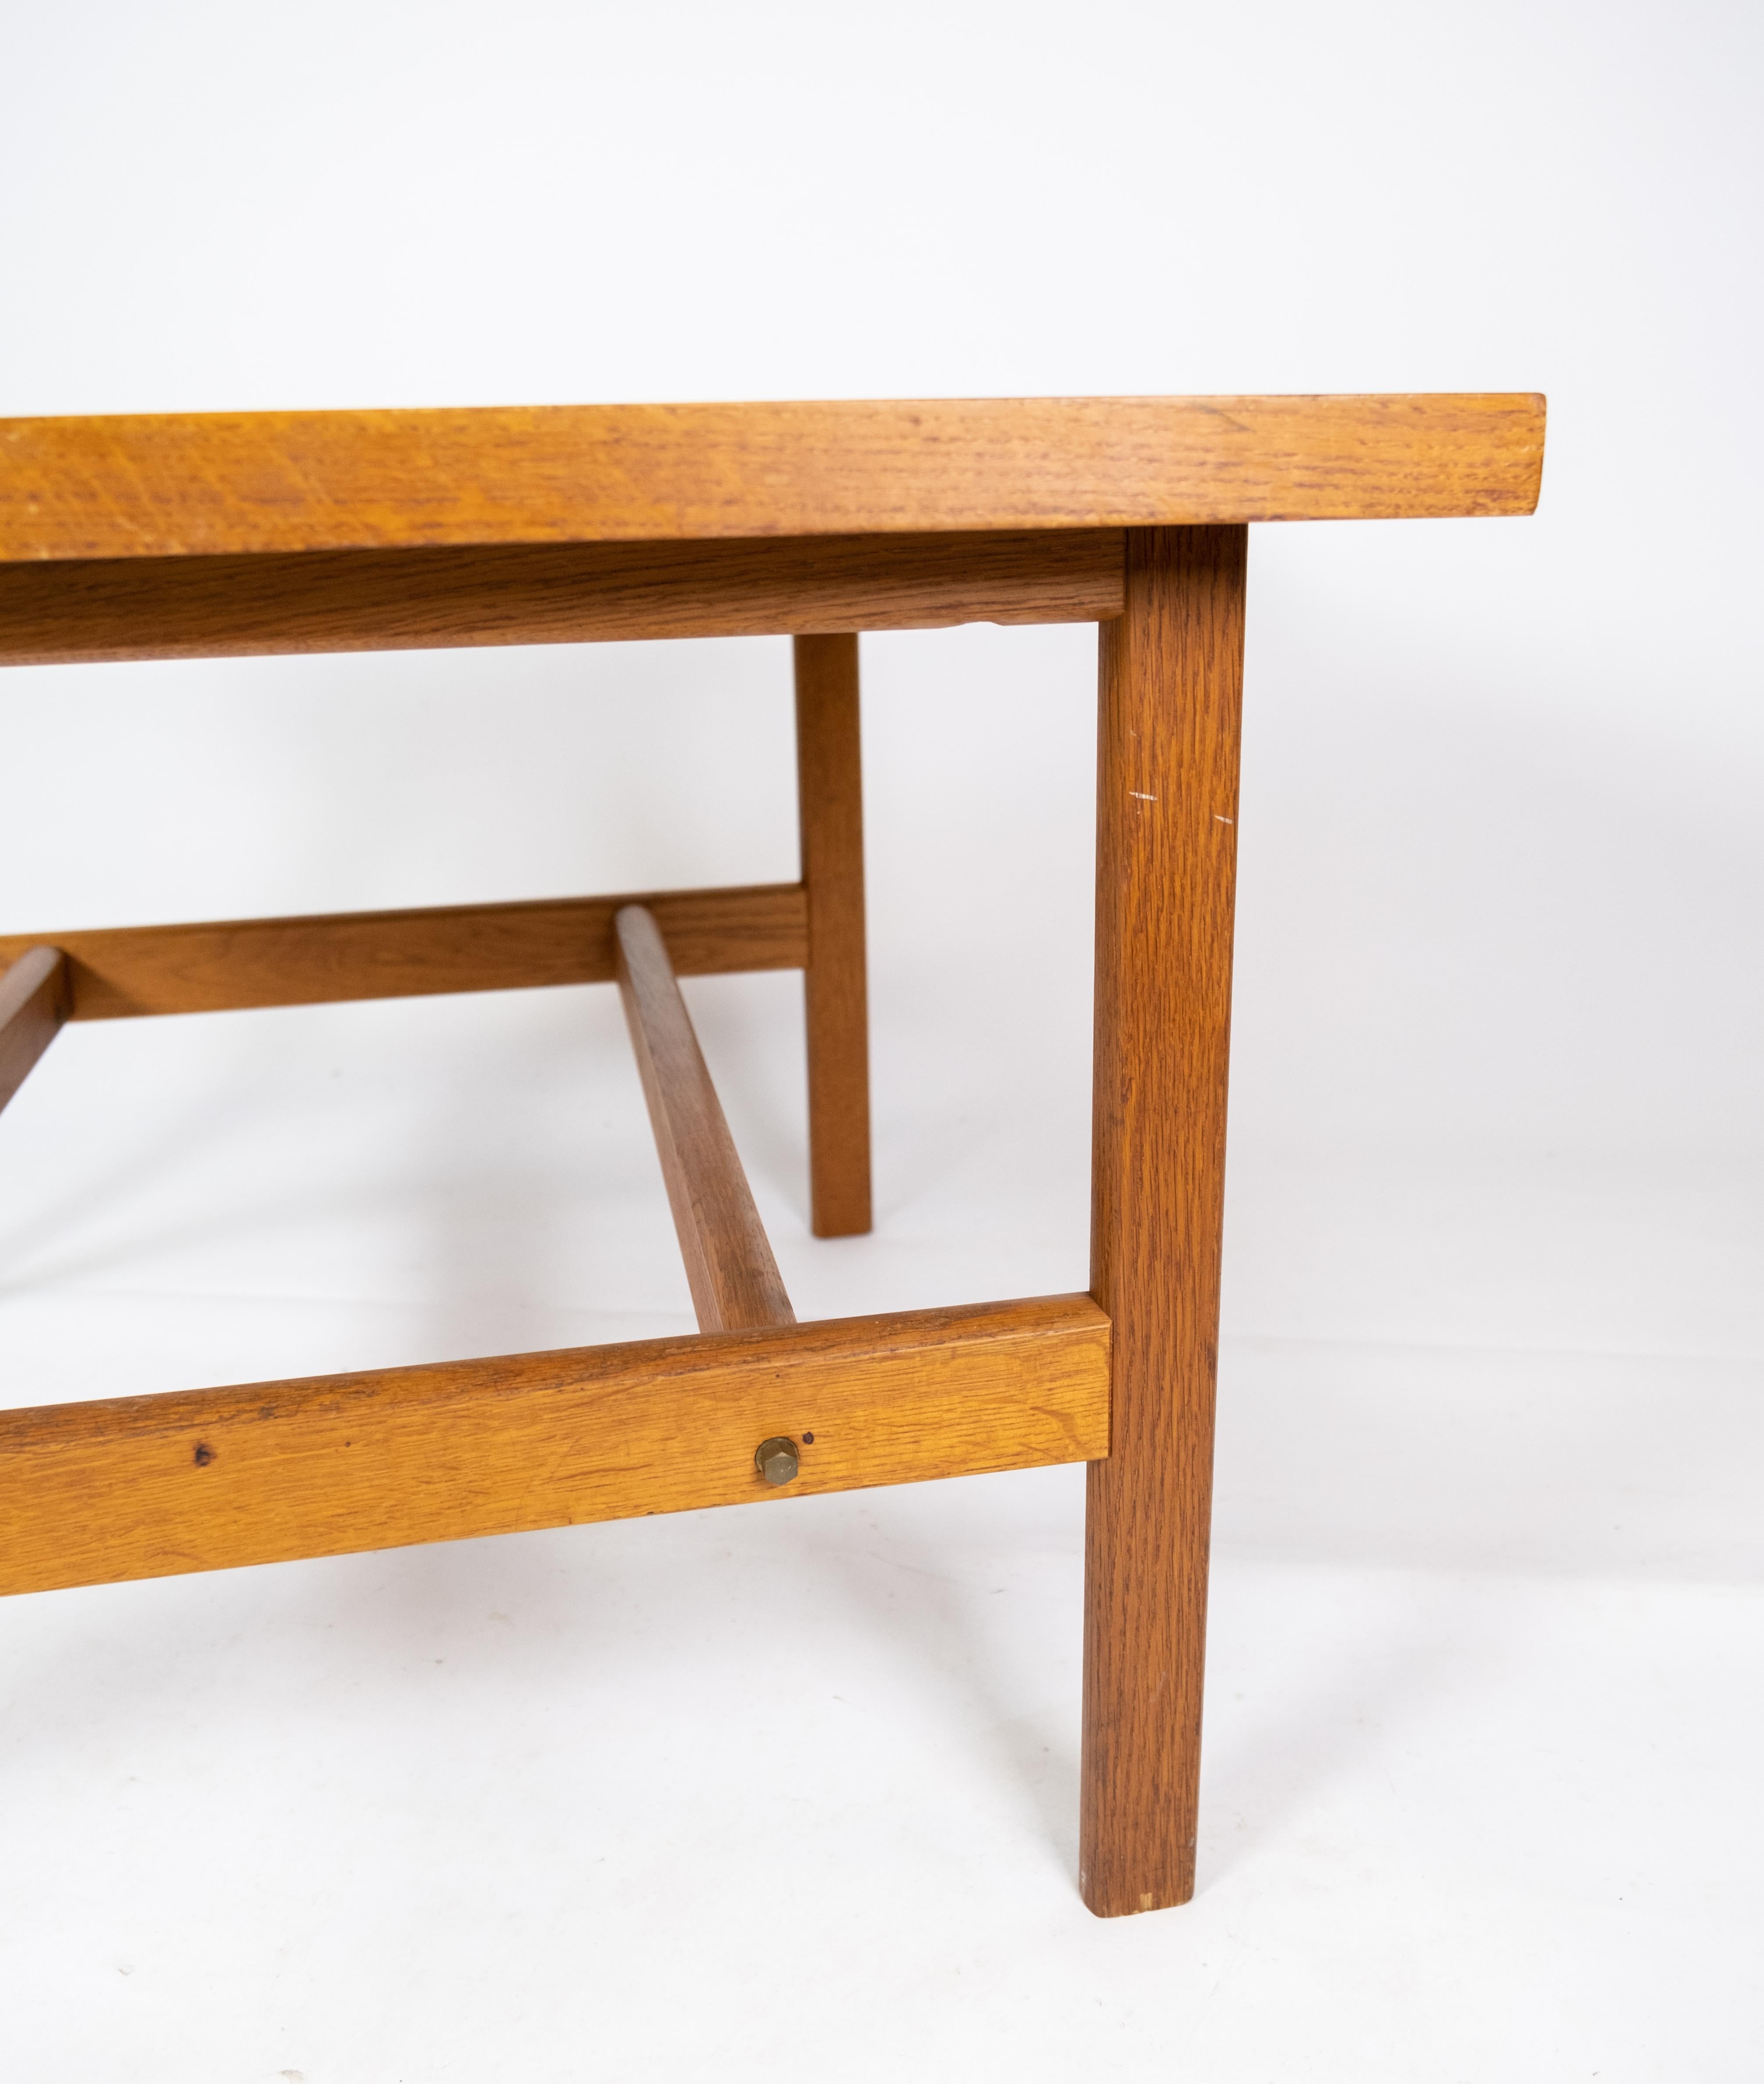 Mid-20th Century Coffee Table in Soap Treated Oak Designed by Hans J. Wegner from the 1960s